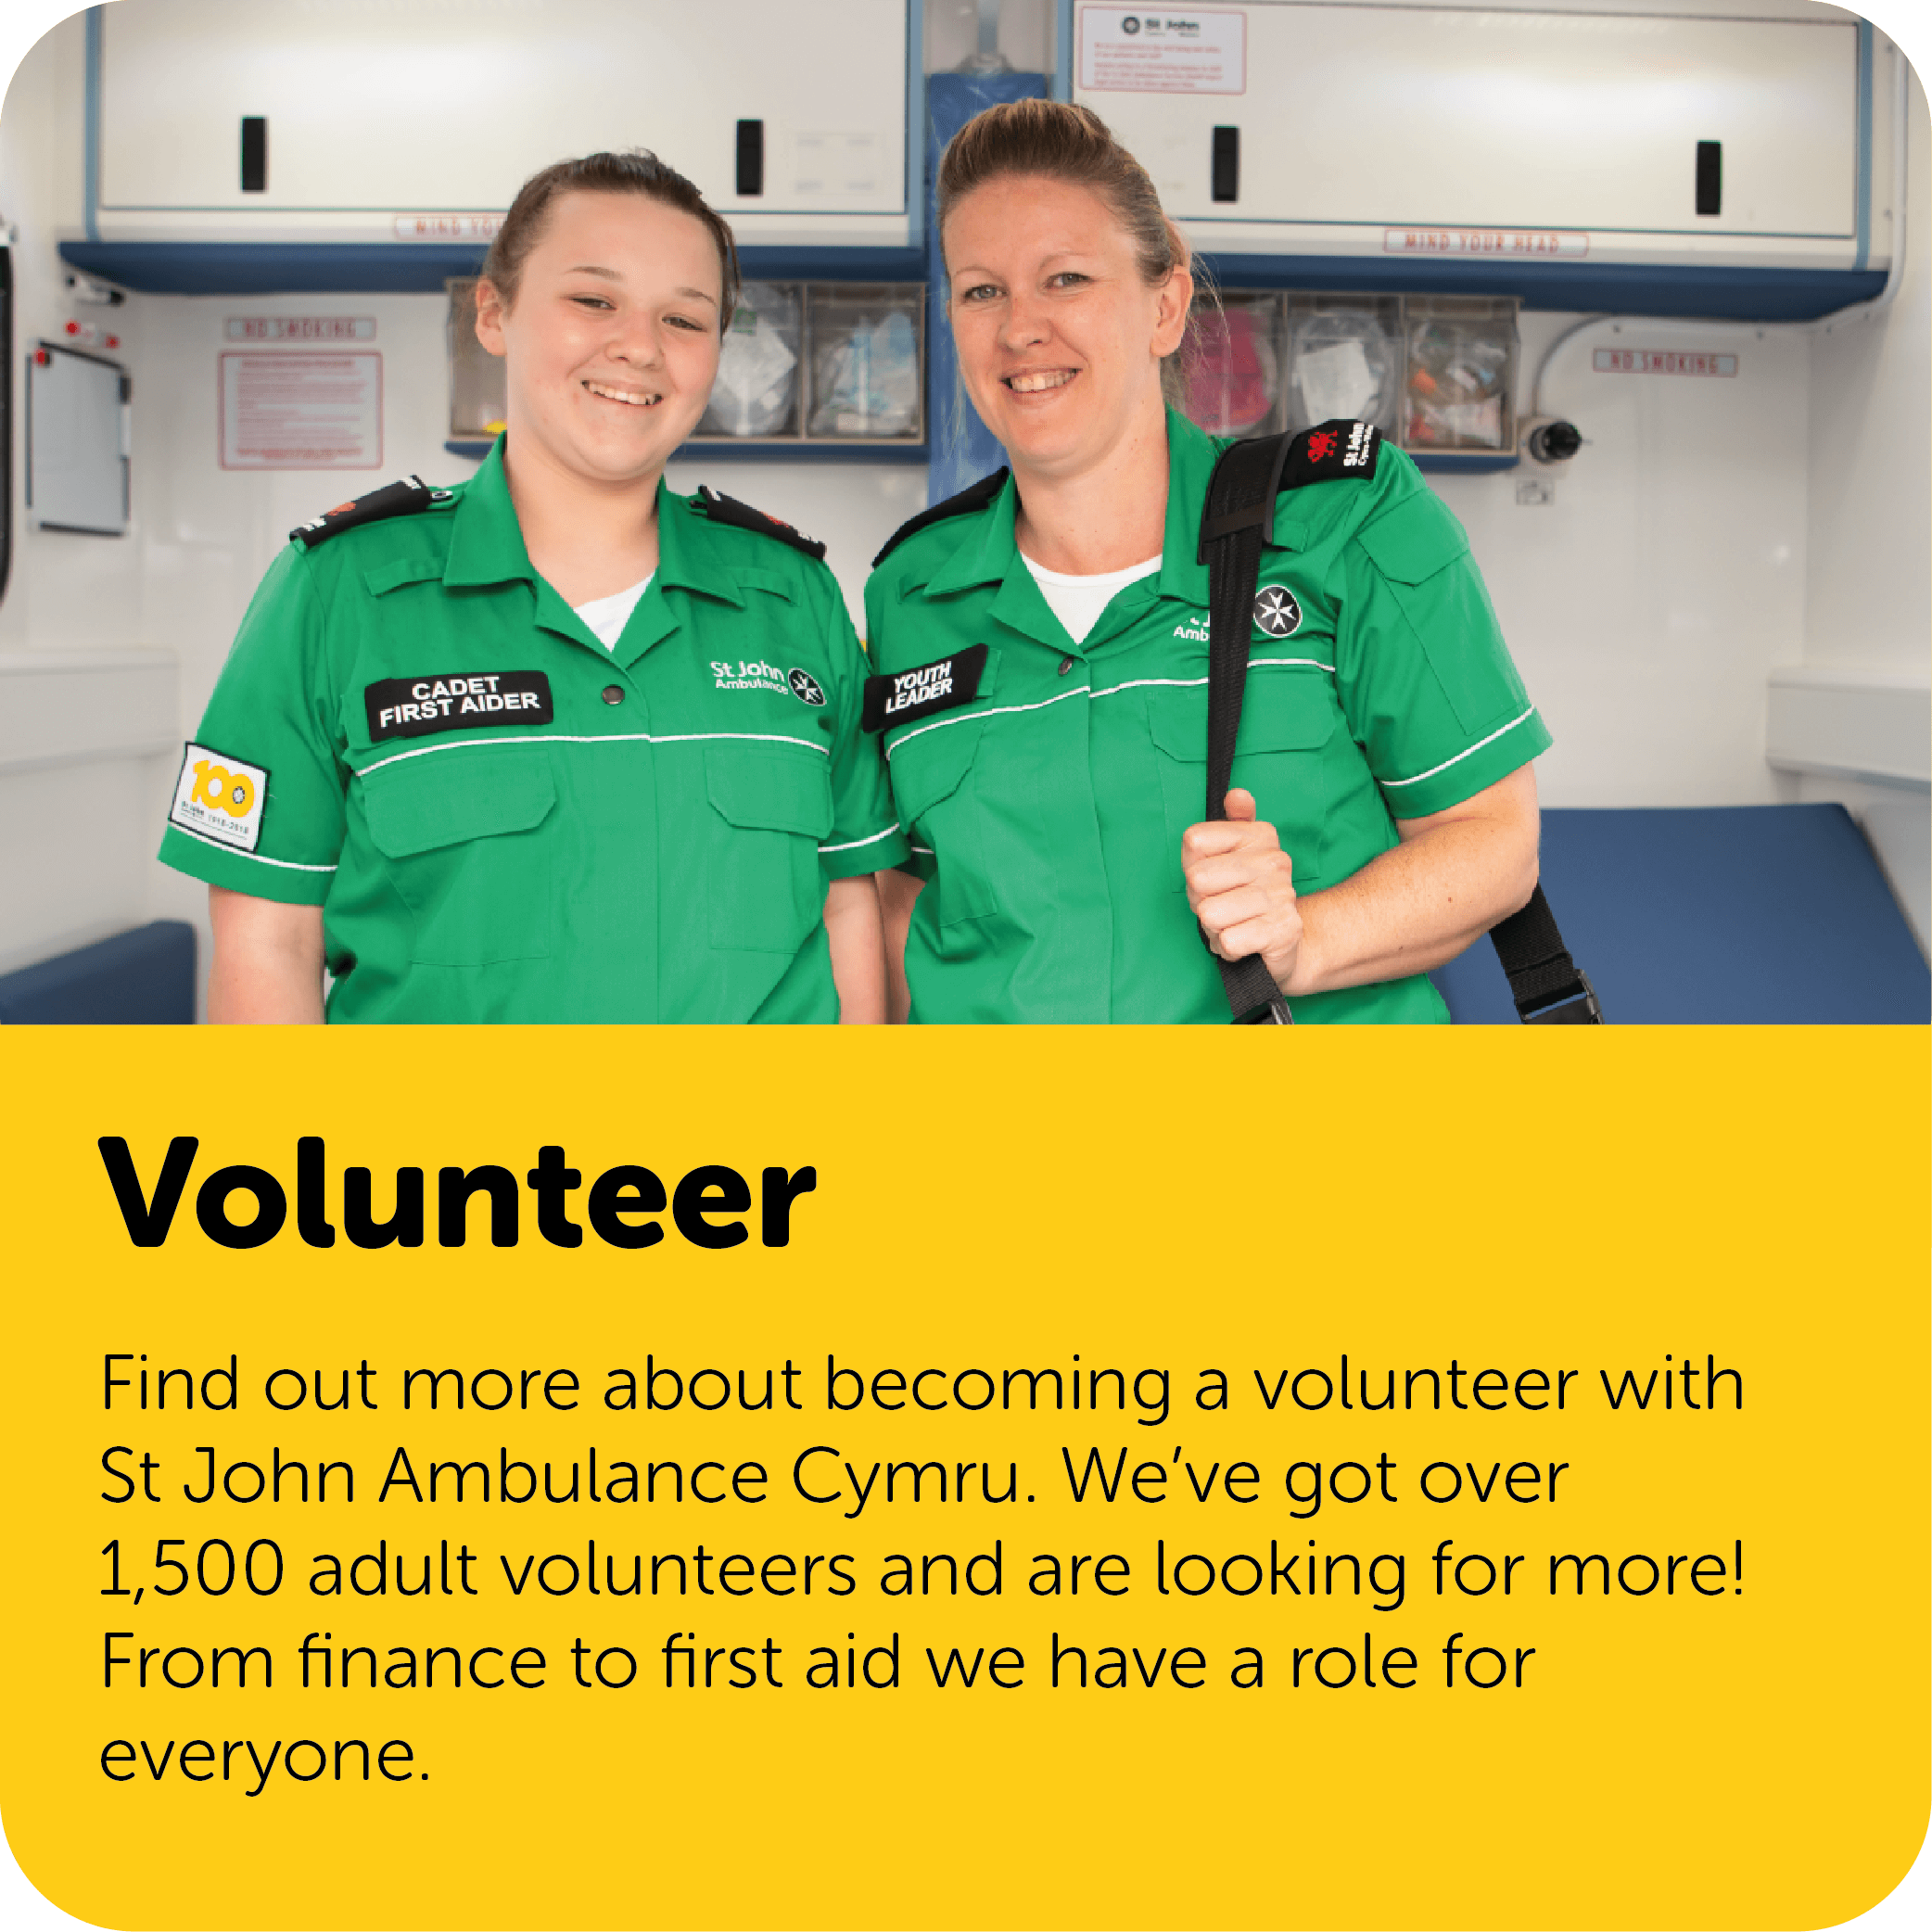 Find out more about becoming a volunteer with St John Ambulance Cymru. We've got over 1500 adult volunteers and looking for more! From finance to first aid we have a role for everyone.